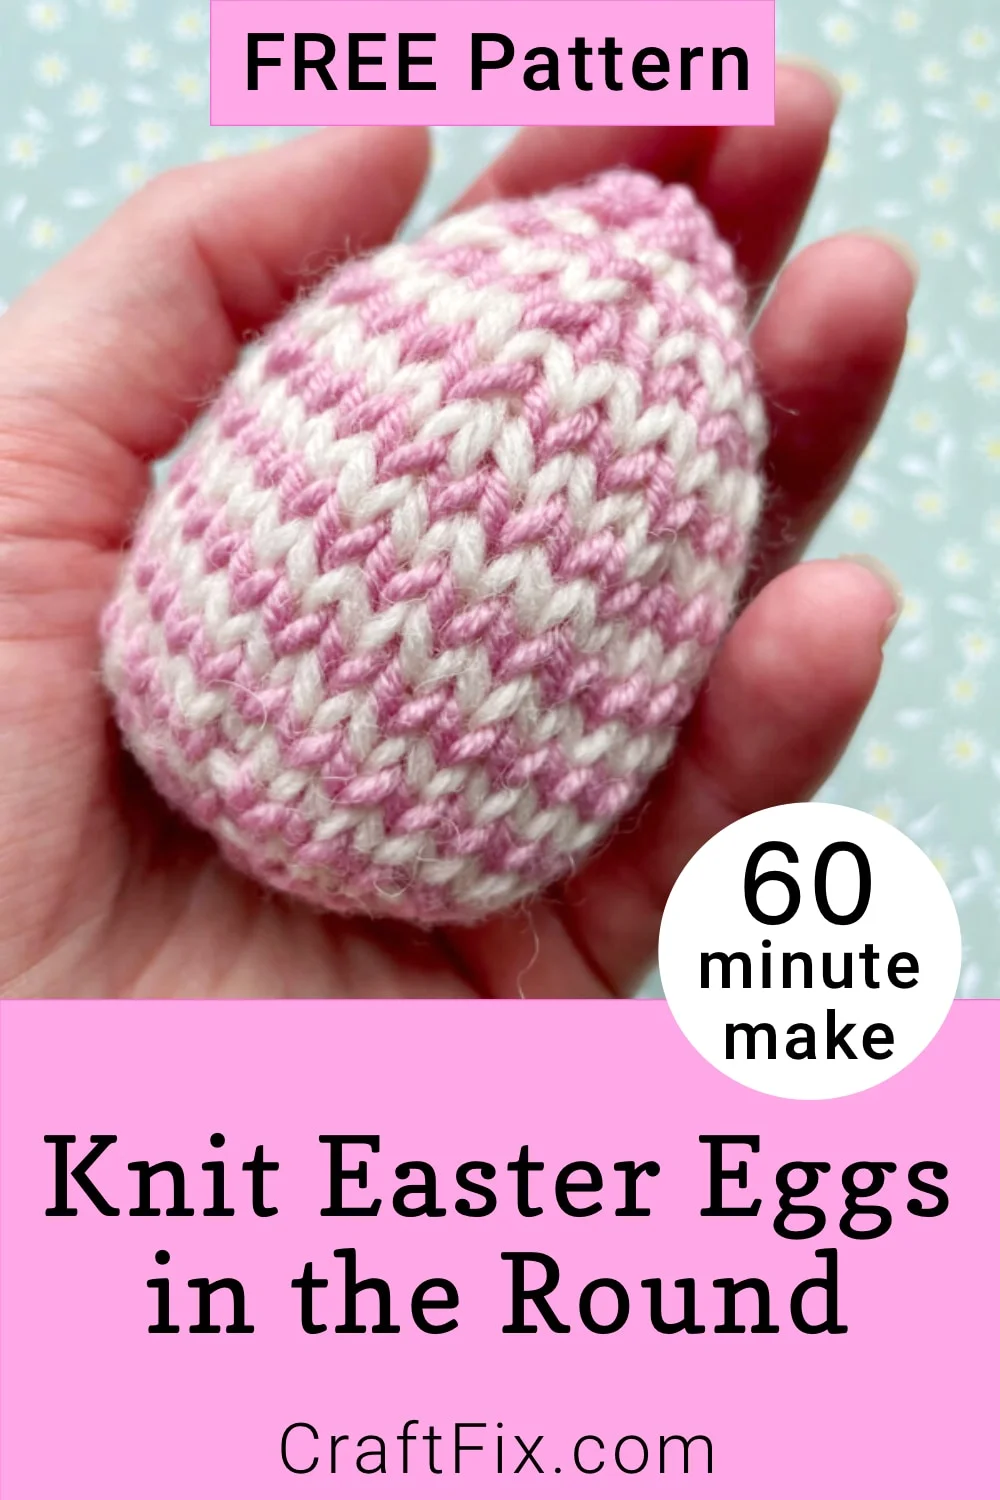 Close up of hand holding striped easter egg decoration knit in the round in 60 minutes with this free pattern